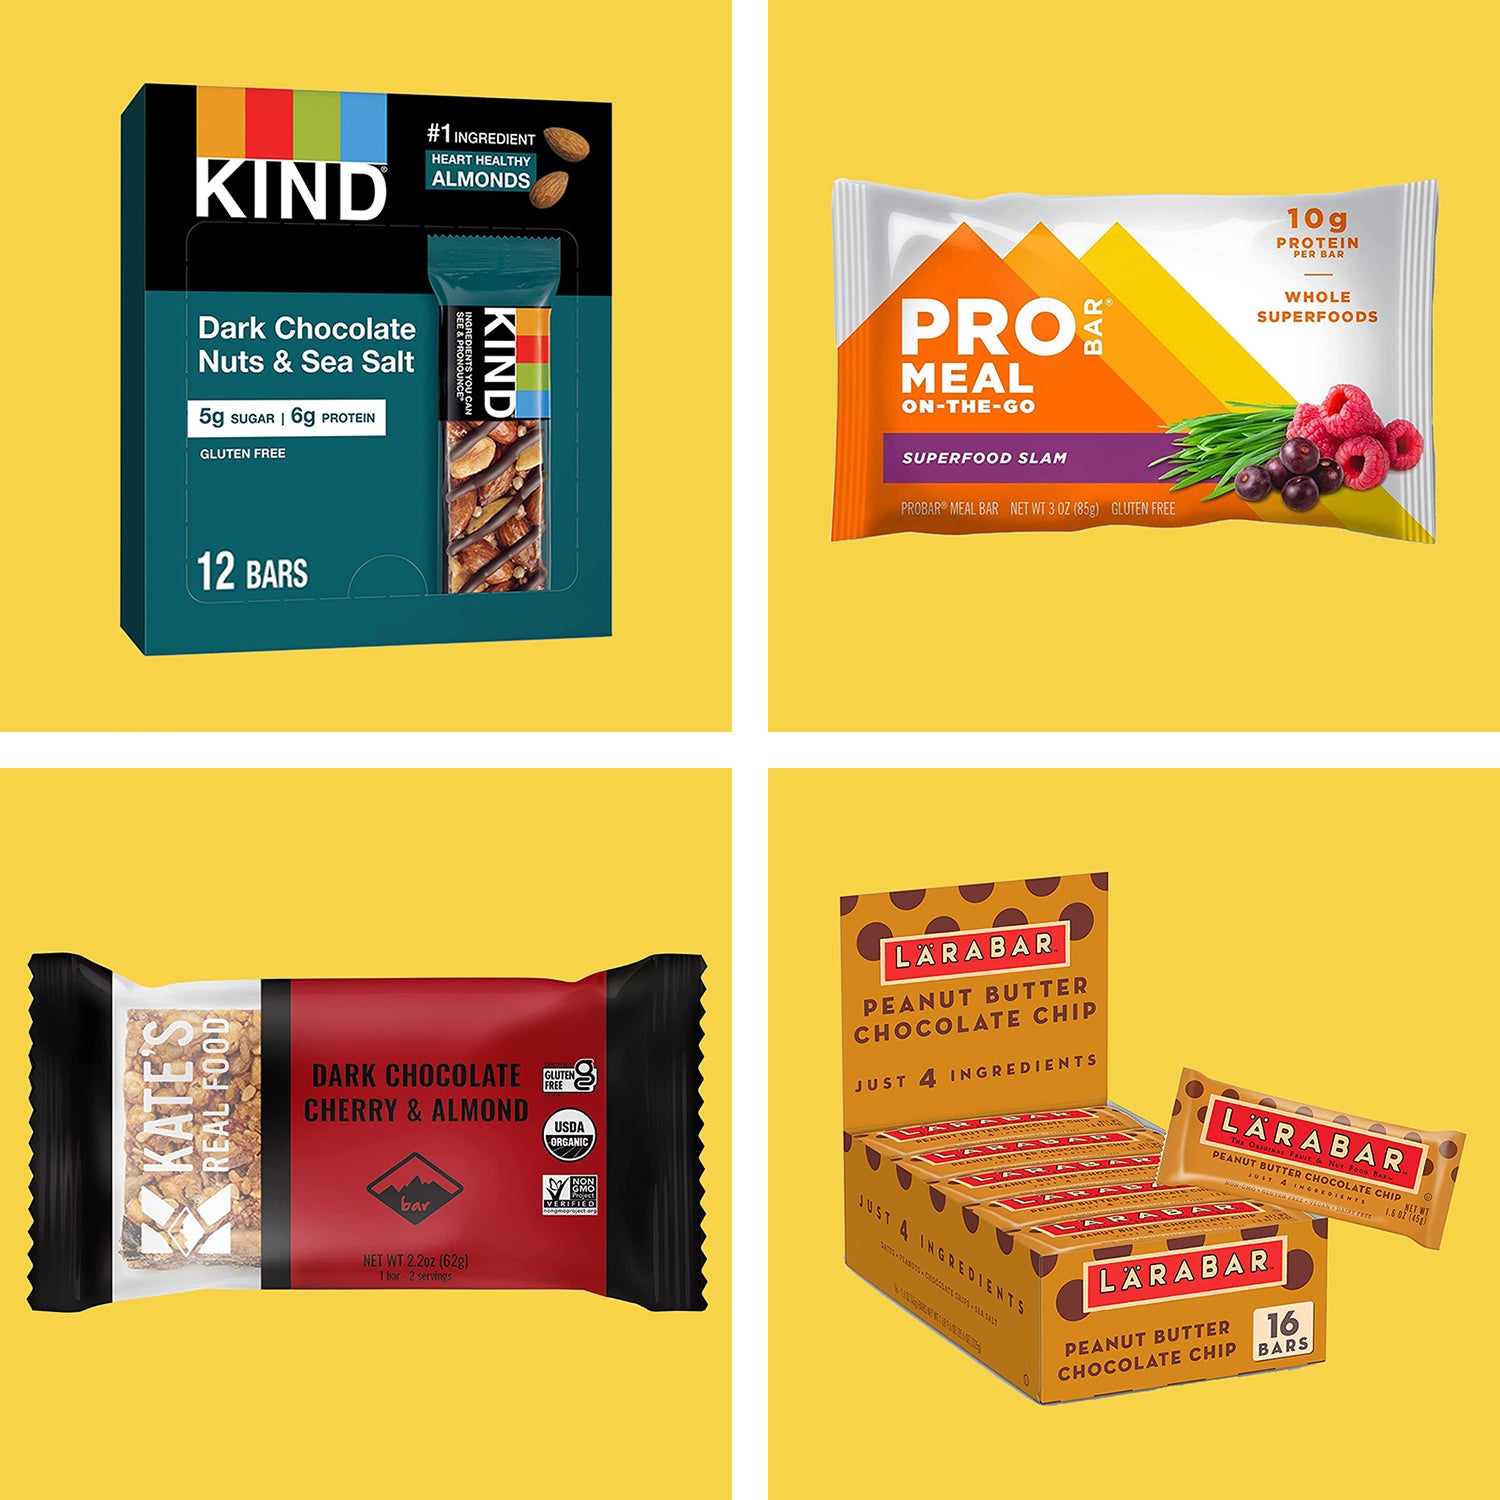 We Put 25 Energy Bars To A Taste Test. Here Are The Best Ones.